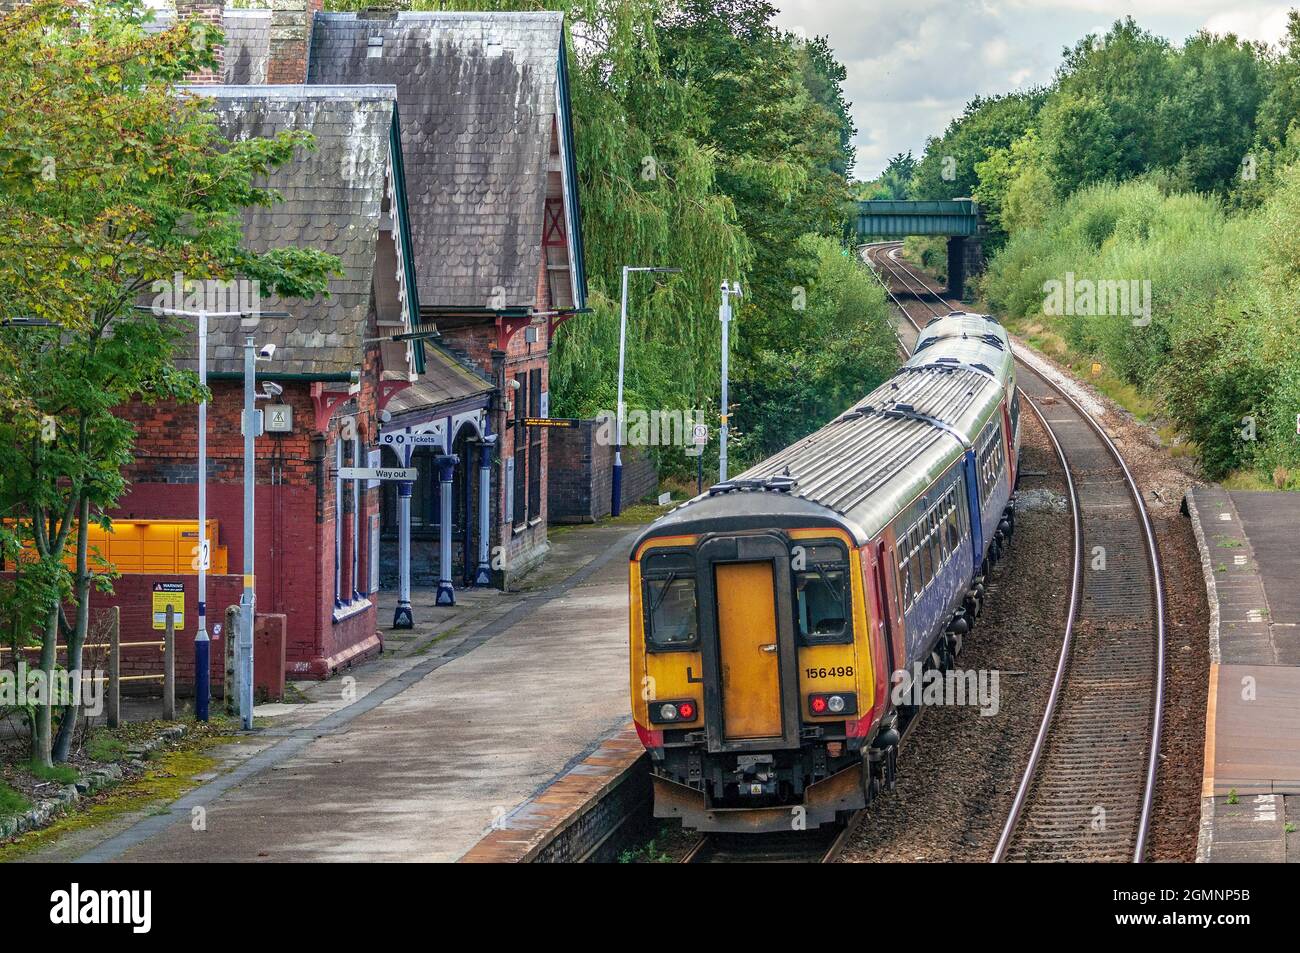 Class 156 diesel multiple unit train passing through rural station. Stock Photo